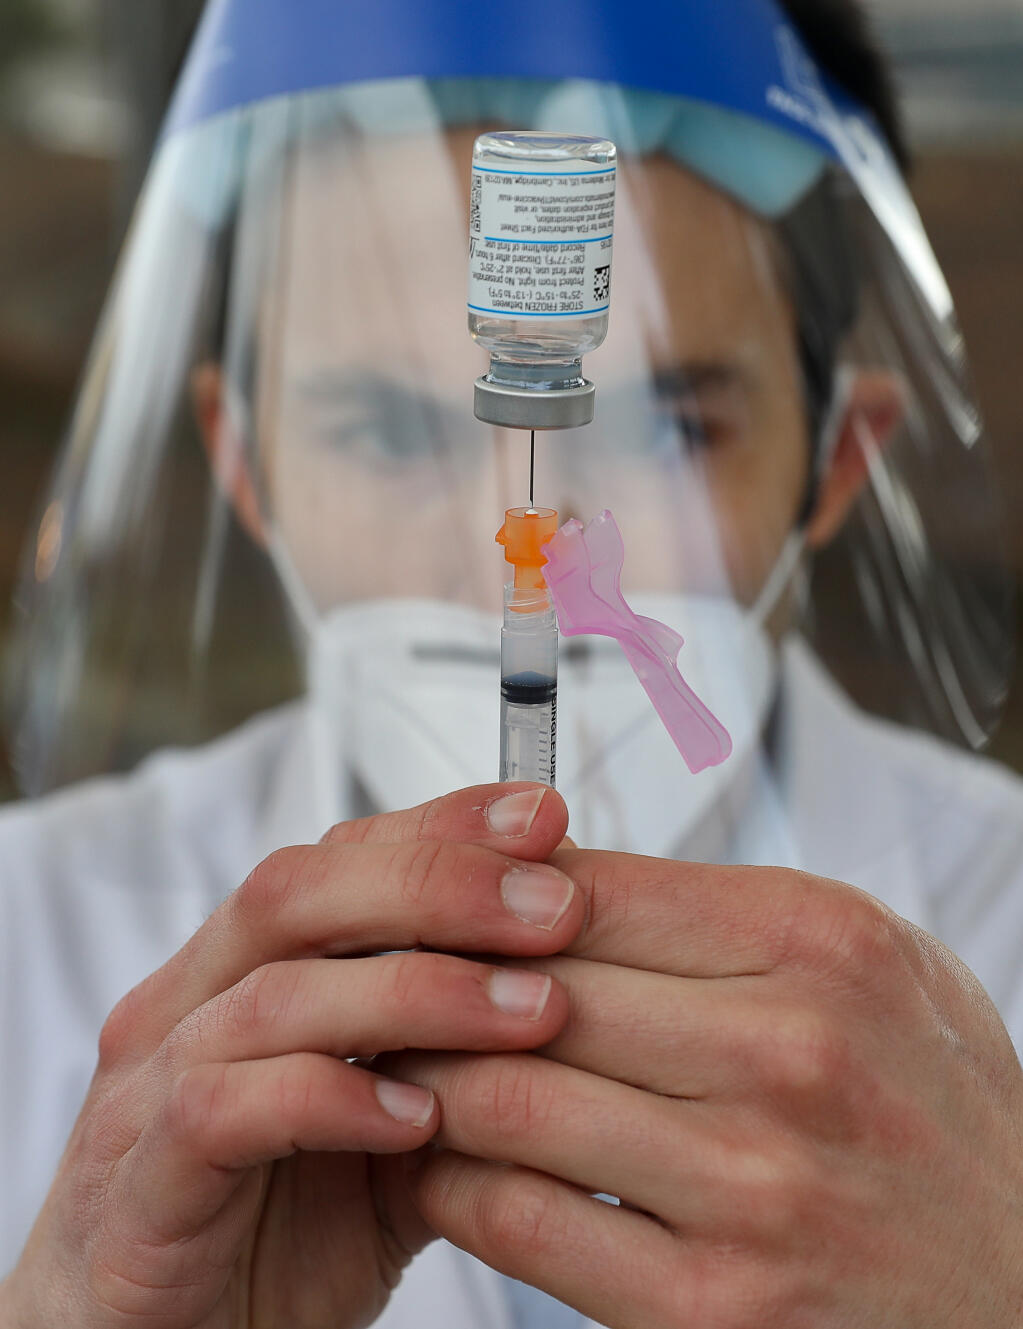 Safeway pharmacy manager Gunner Olsen prepares a syringe with the Moderna COVID-19 vaccination in Santa Rosa on Wednesday, January 13, 2021.  (Christopher Chung/ The Press Democrat)